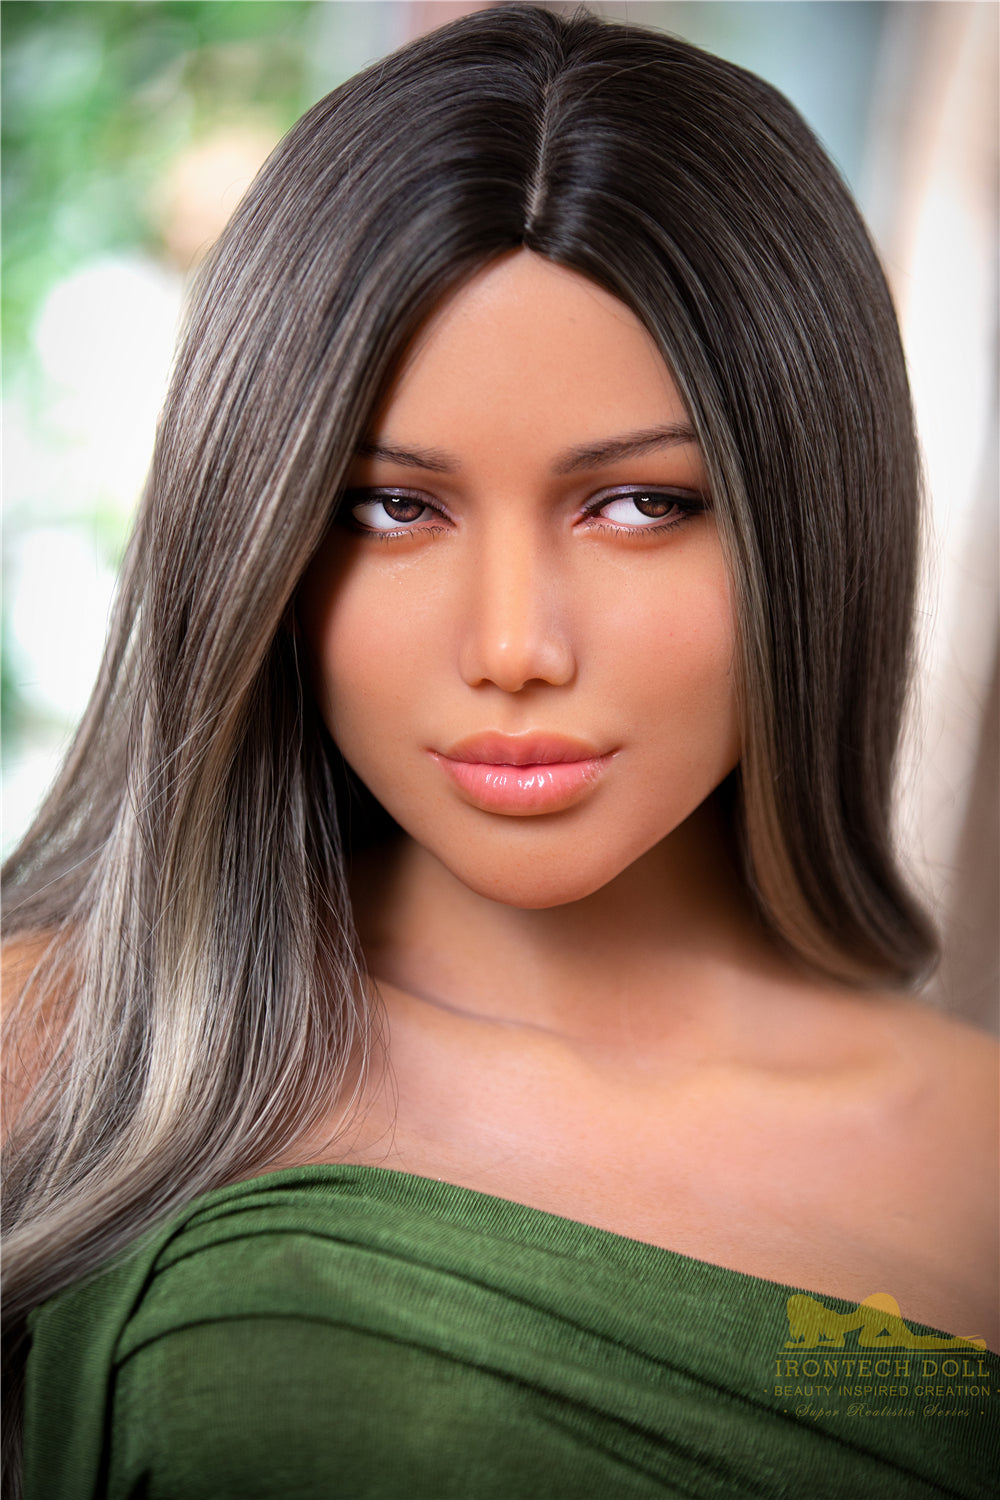 Irontech Doll 166 cm C Silicone - Celine | Buy Sex Dolls at DOLLS ACTUALLY